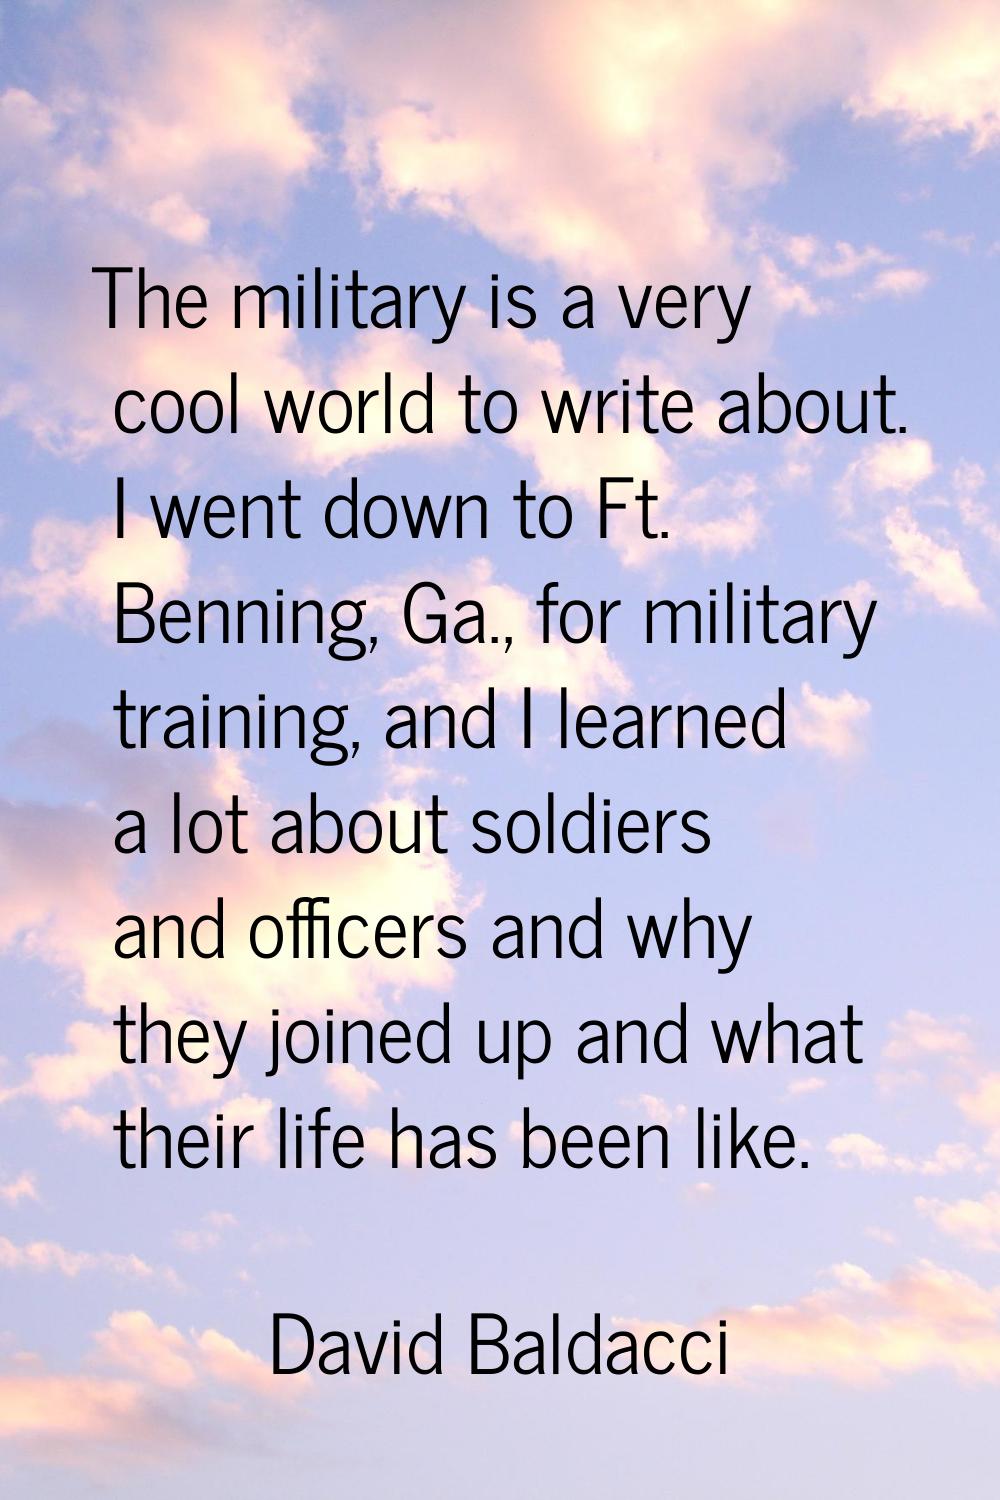 The military is a very cool world to write about. I went down to Ft. Benning, Ga., for military tra